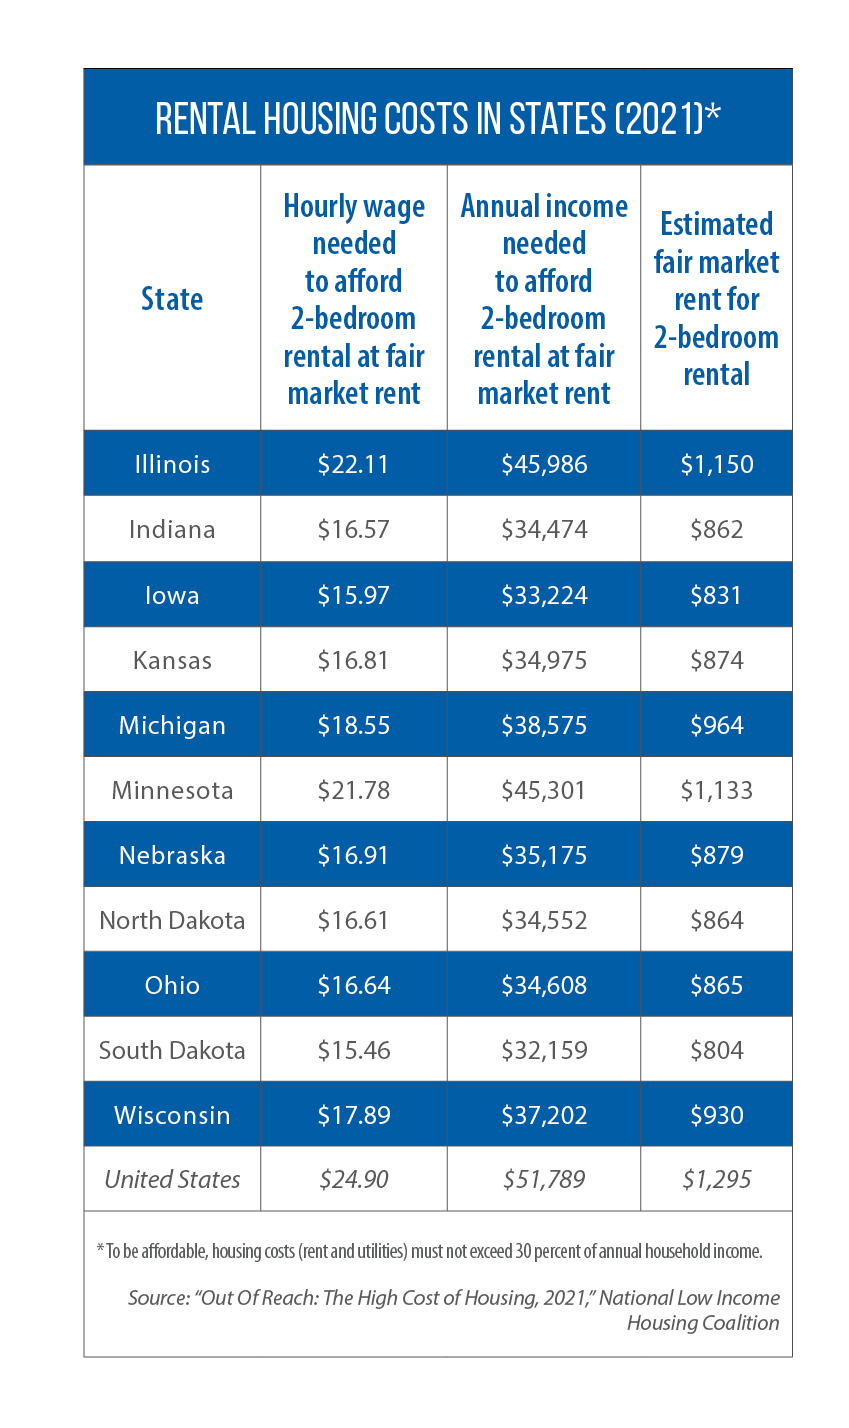 Table showing rental housing costs in Midwestern states as of 2021